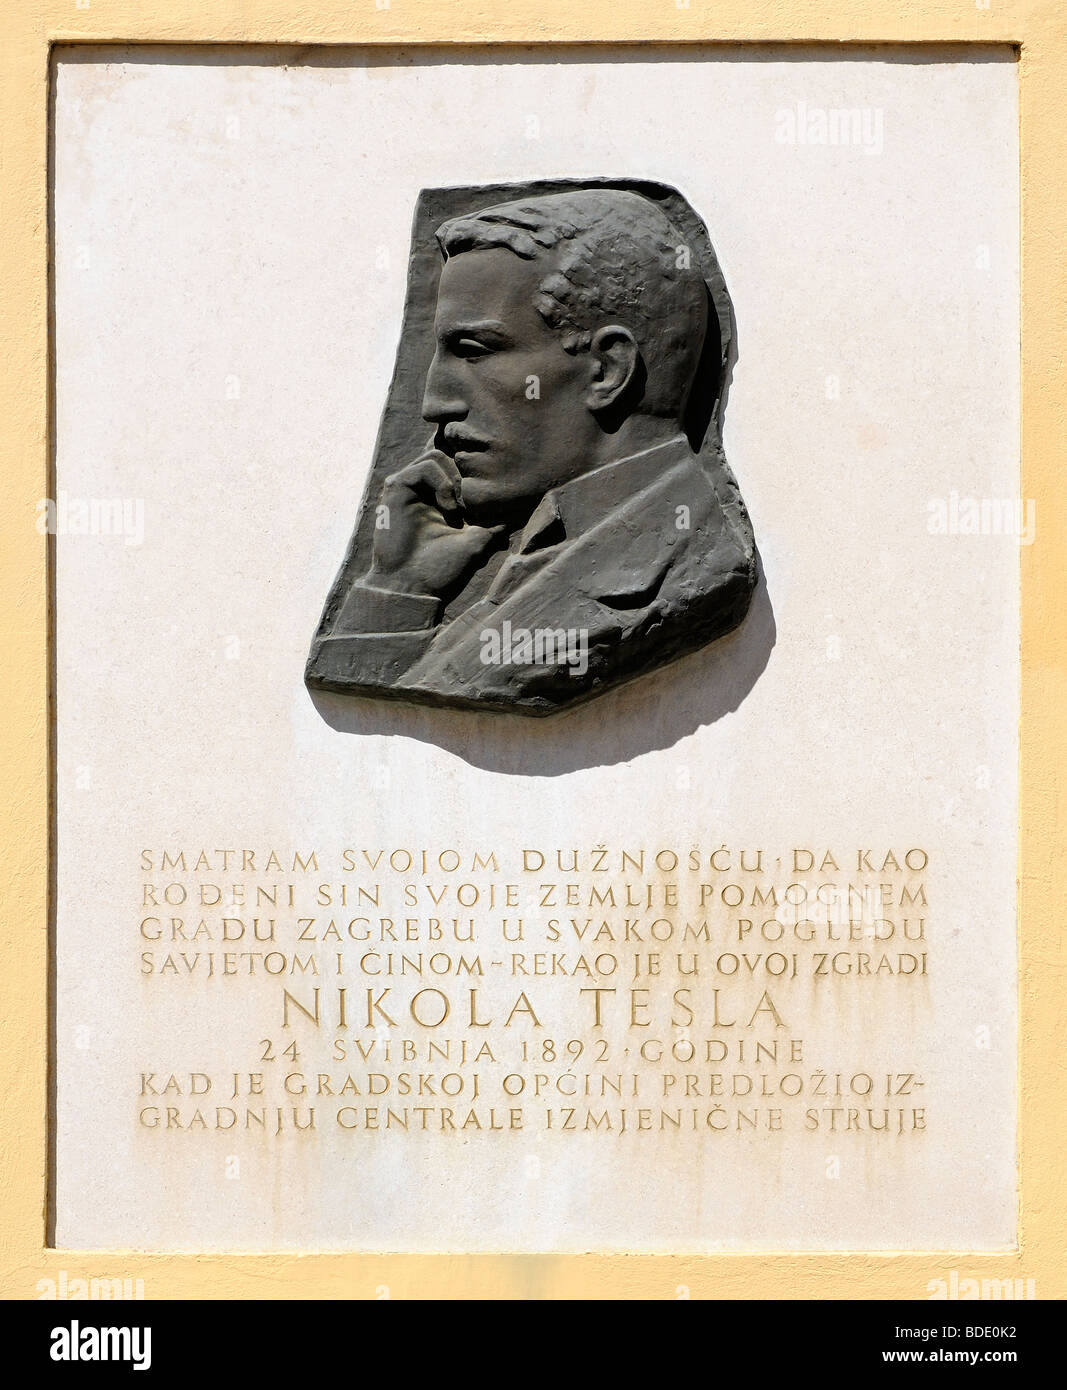 Zagreb, Croatia. Wall plaque commemorating speech by Nikola Tesla (Electrical Engineer; 1856-1943) (see descrip. for text trans) Stock Photo